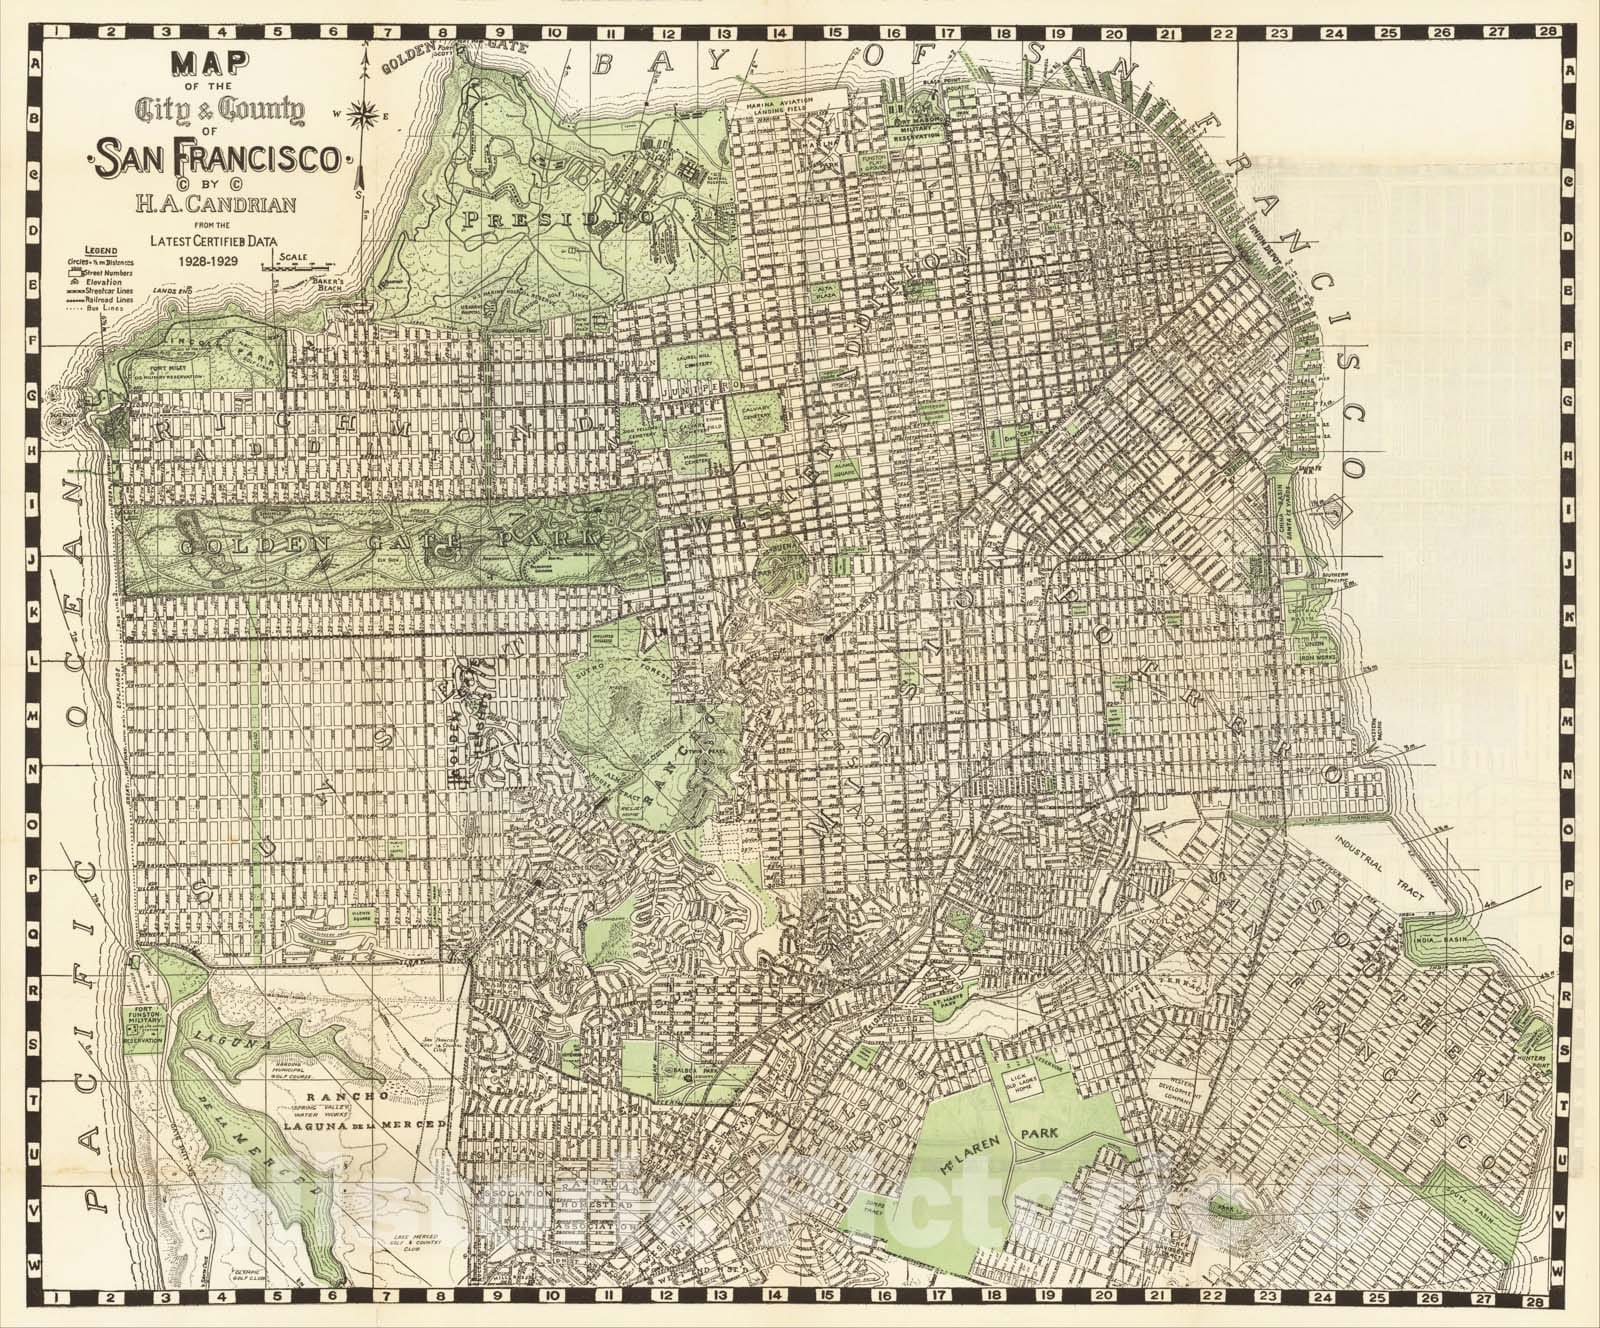 Historic Map : Map of the City and County of San Francisco By H.A. Candrian From the Lastest Certified Data 1928-29, c1929, H.A. Candrian, Vintage Wall Art